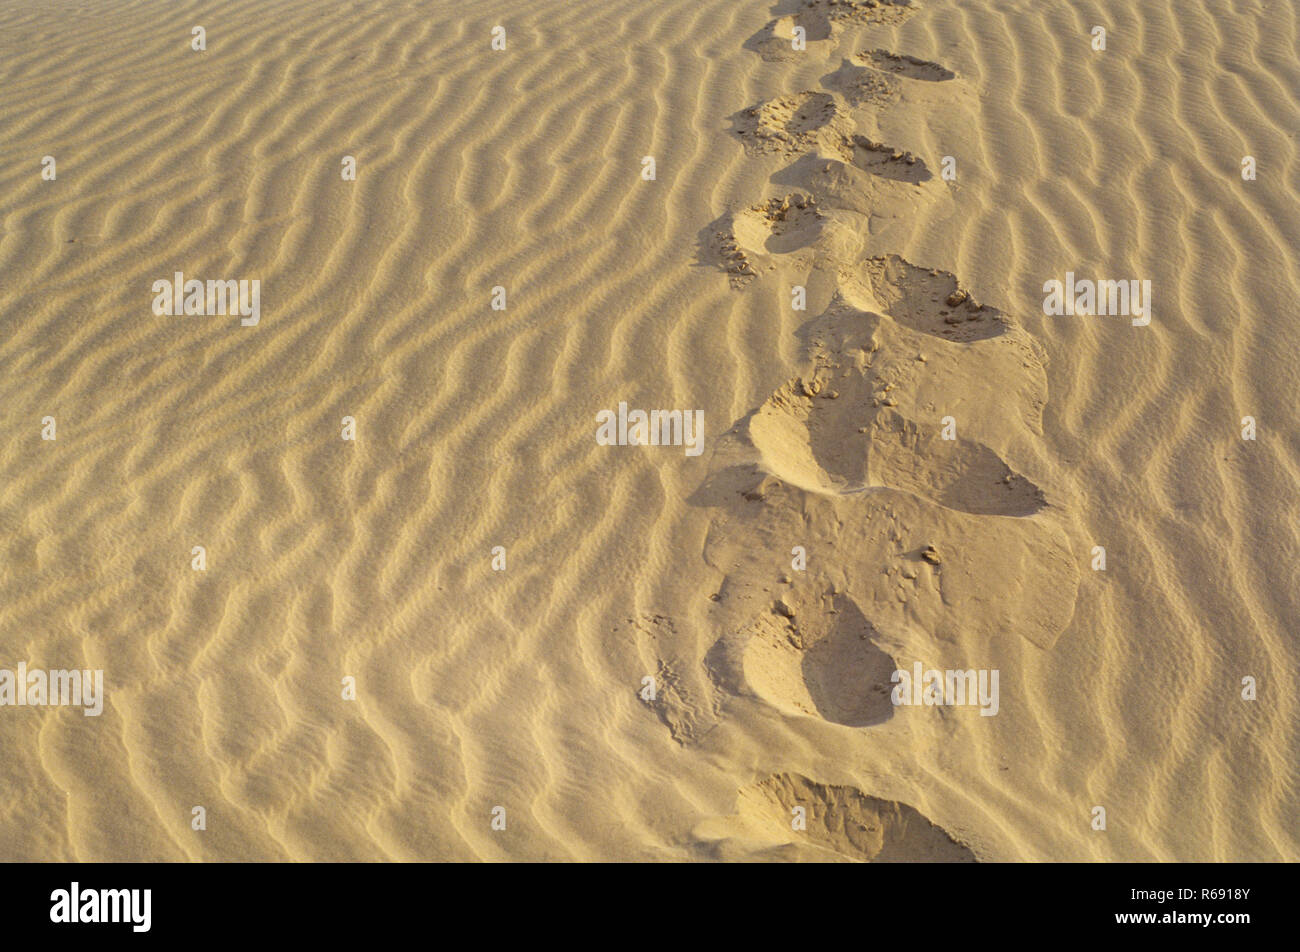 Human footprints in desert sand in Rajasthan, India Stock Photo